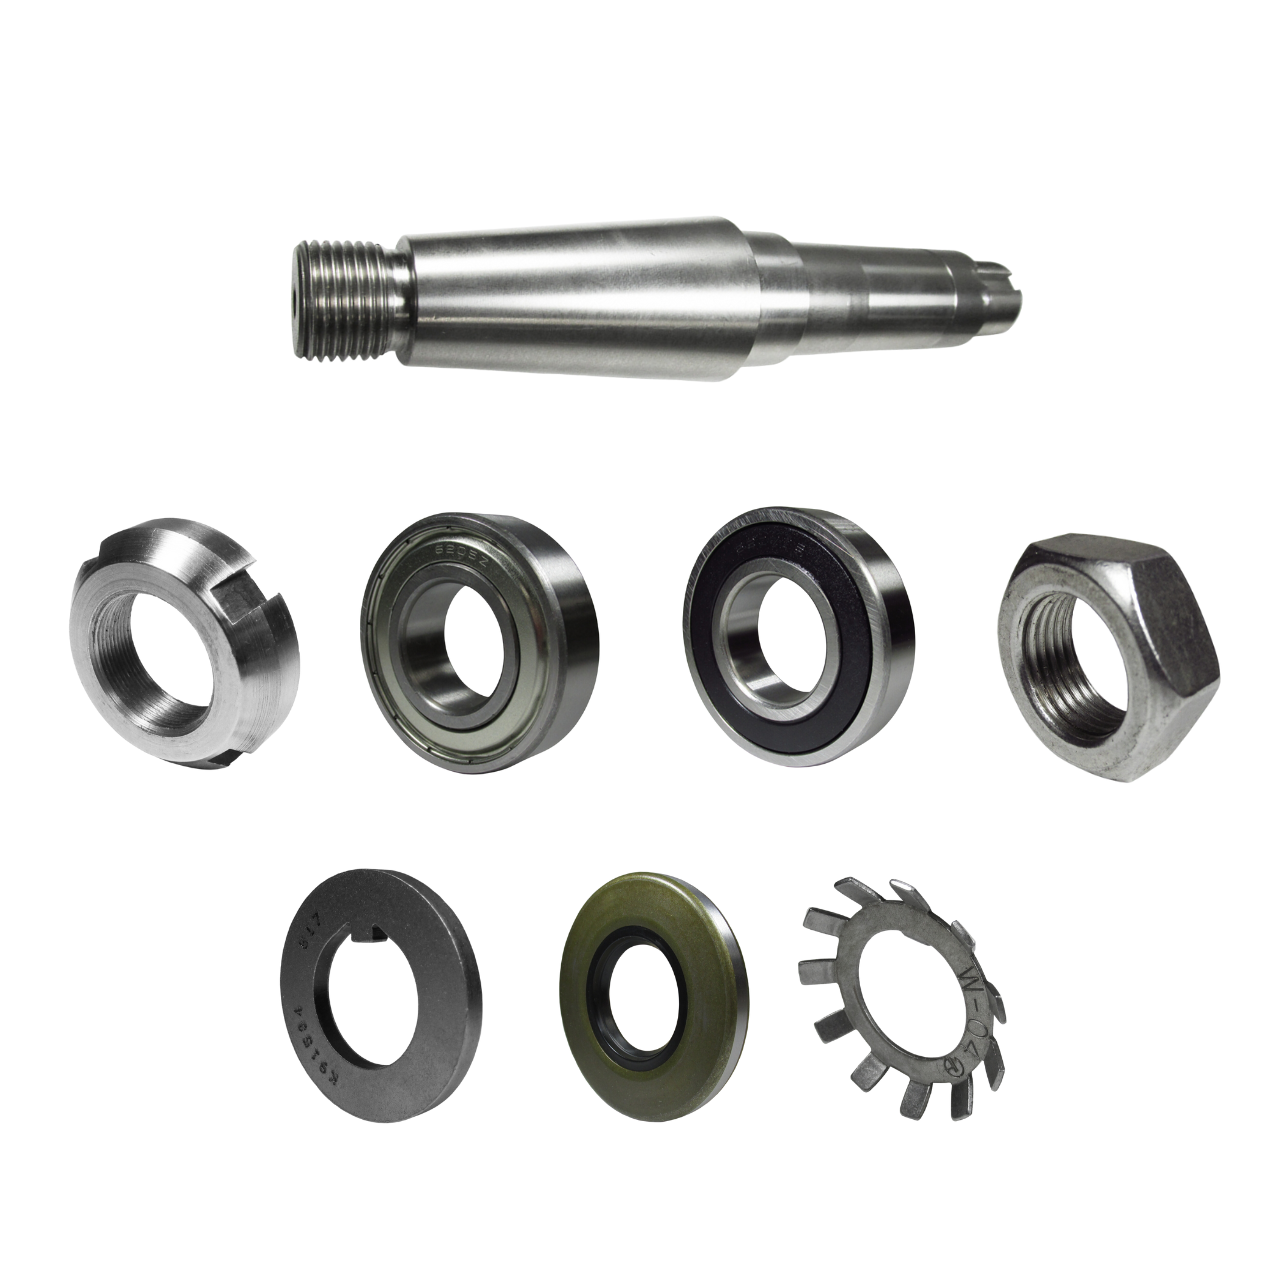 Upper Wheel Shaft Kit For Hollymatic Hi-Yield 16 Meat Saw Replaces 680-2032,2034,2031,1116, 74000-8240, 680-1224,1223